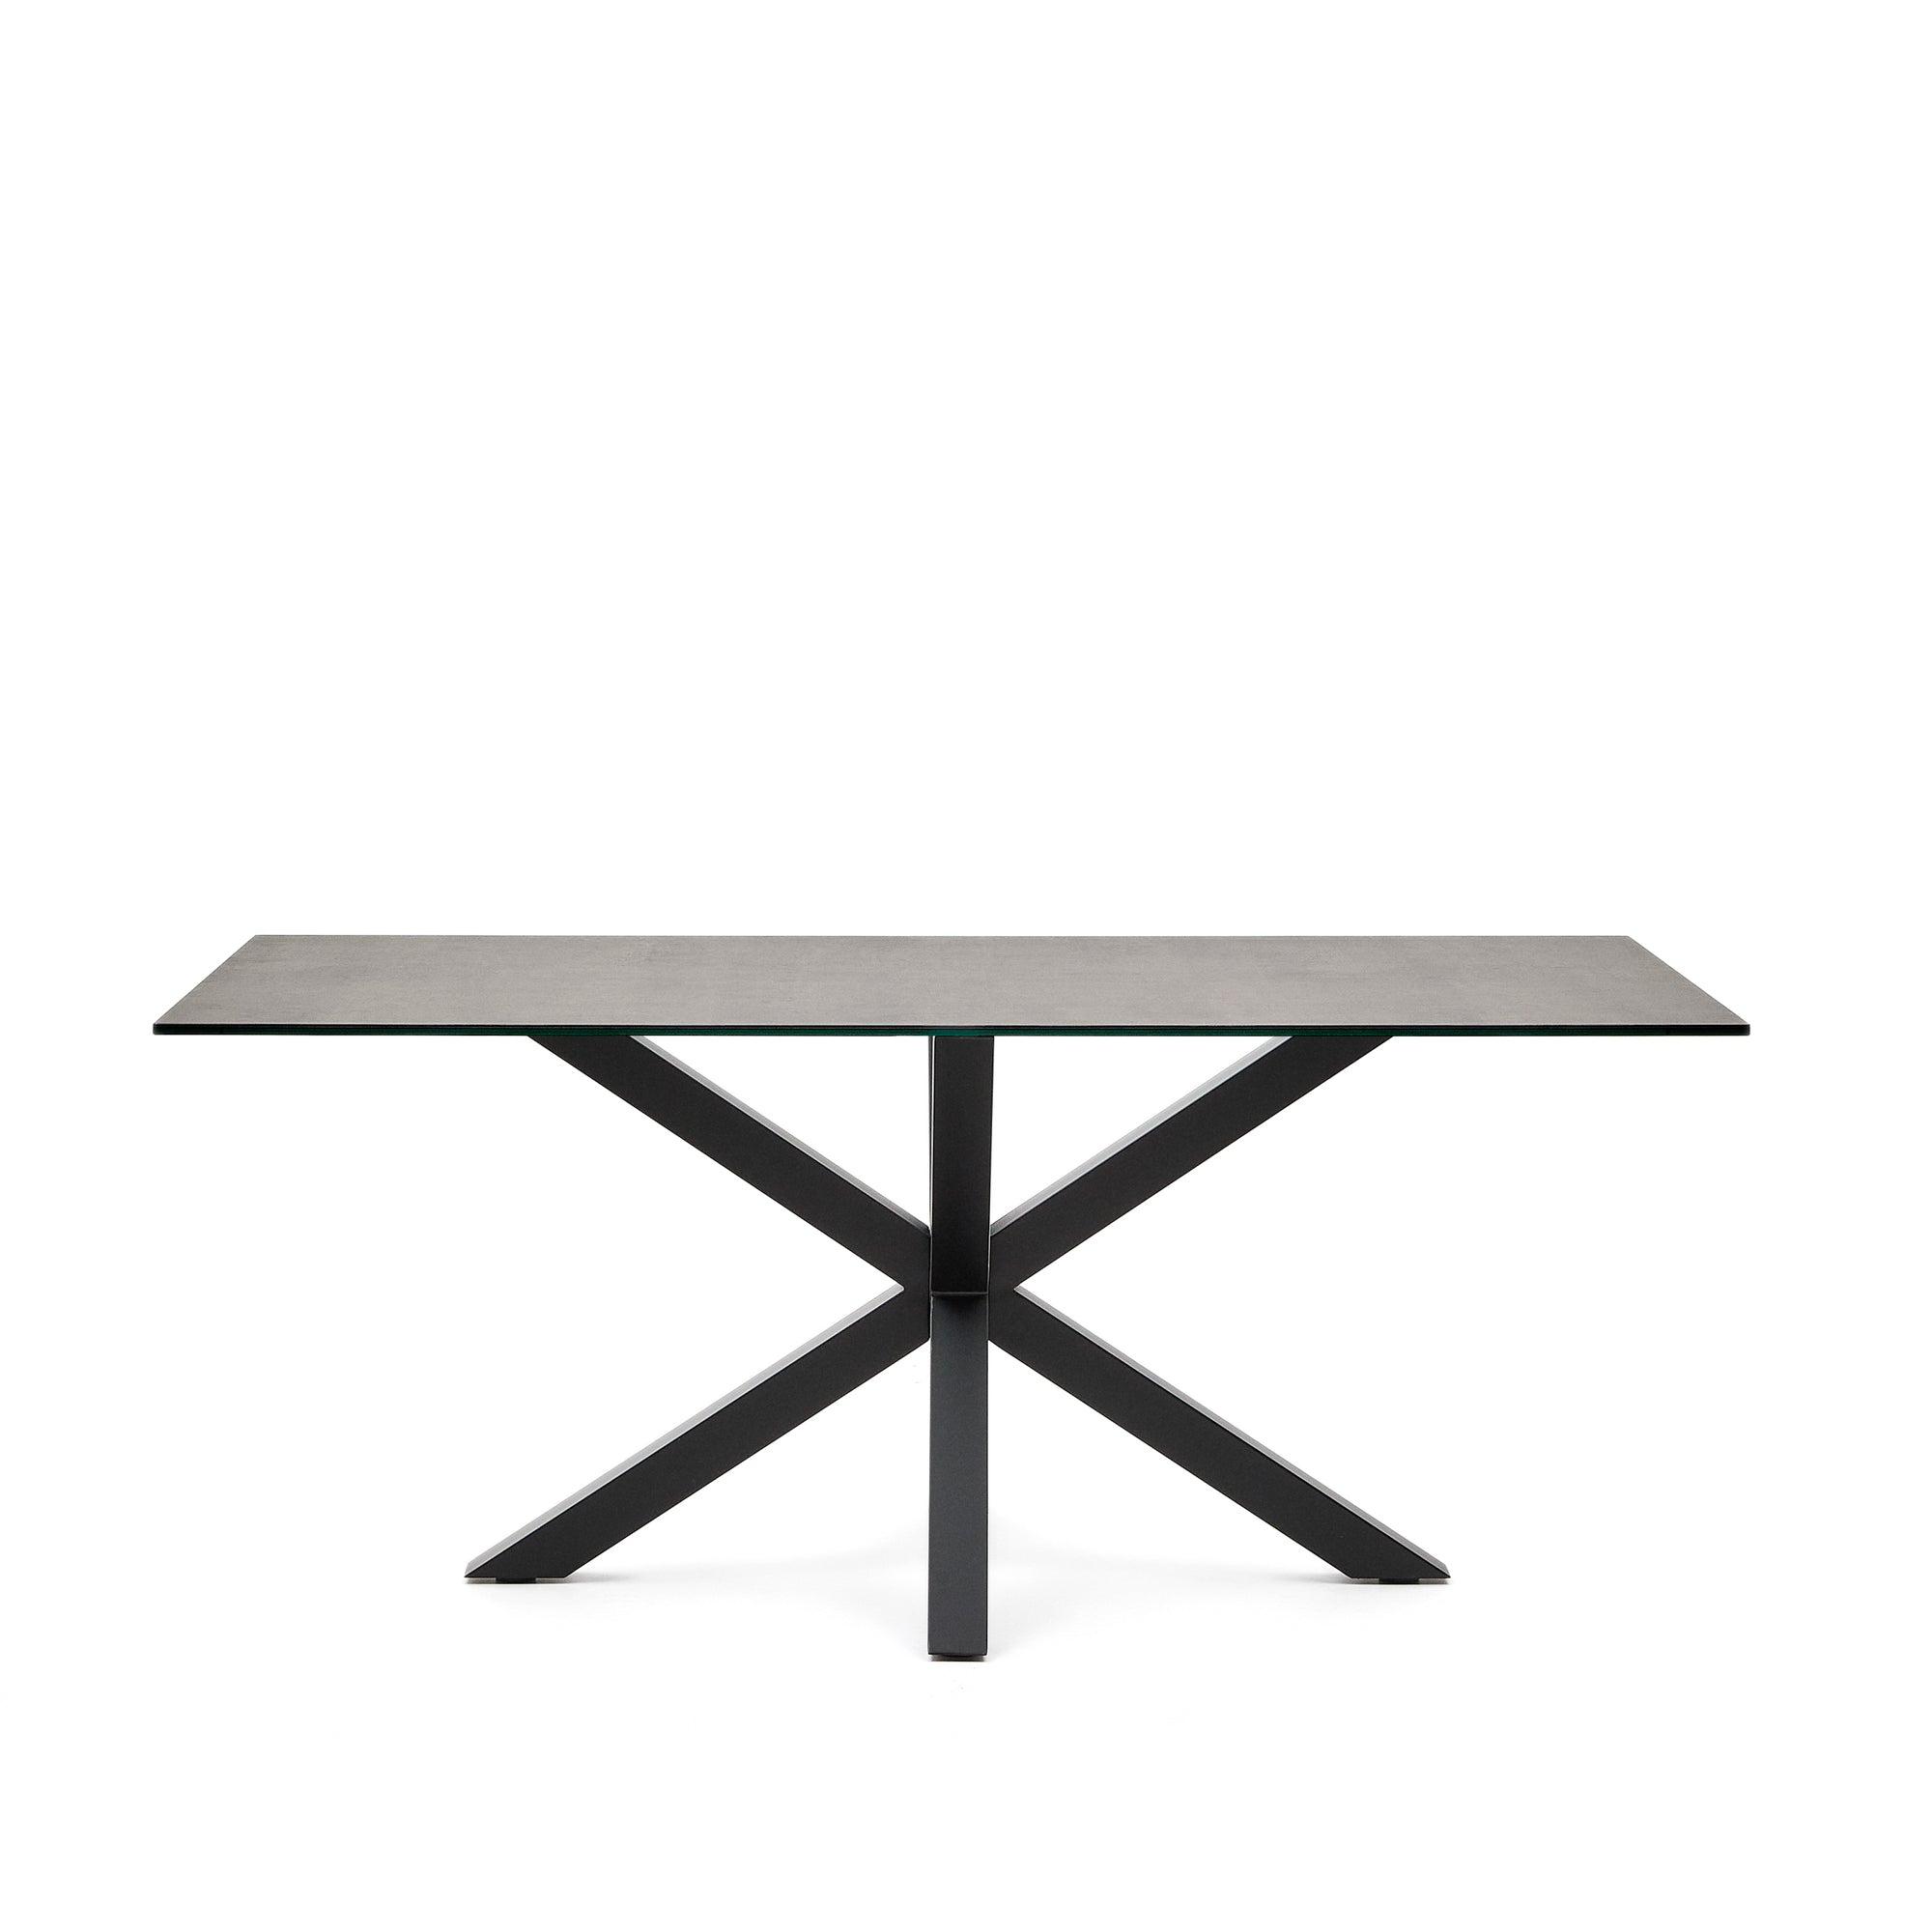 Argo table in Iron Moss porcelain and steel legs with black finish, 180 x 100 cm